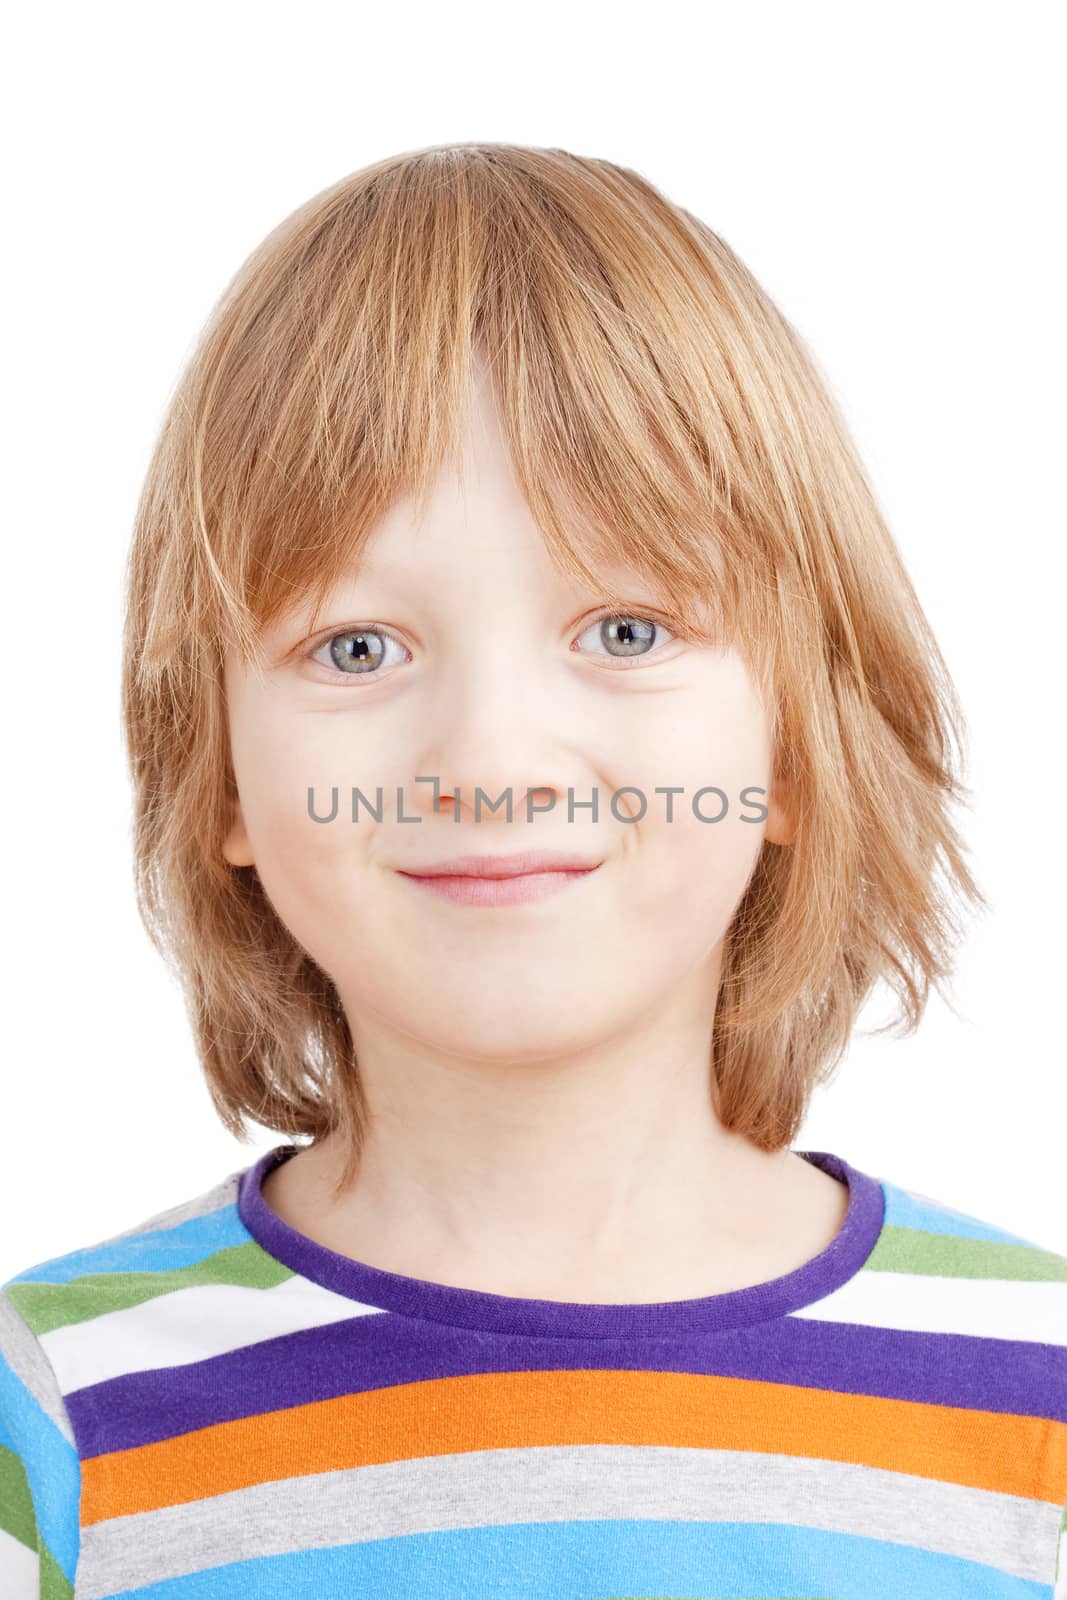 Portrait of a Boy with Blond Hair in Colorful Shirt by courtyardpix